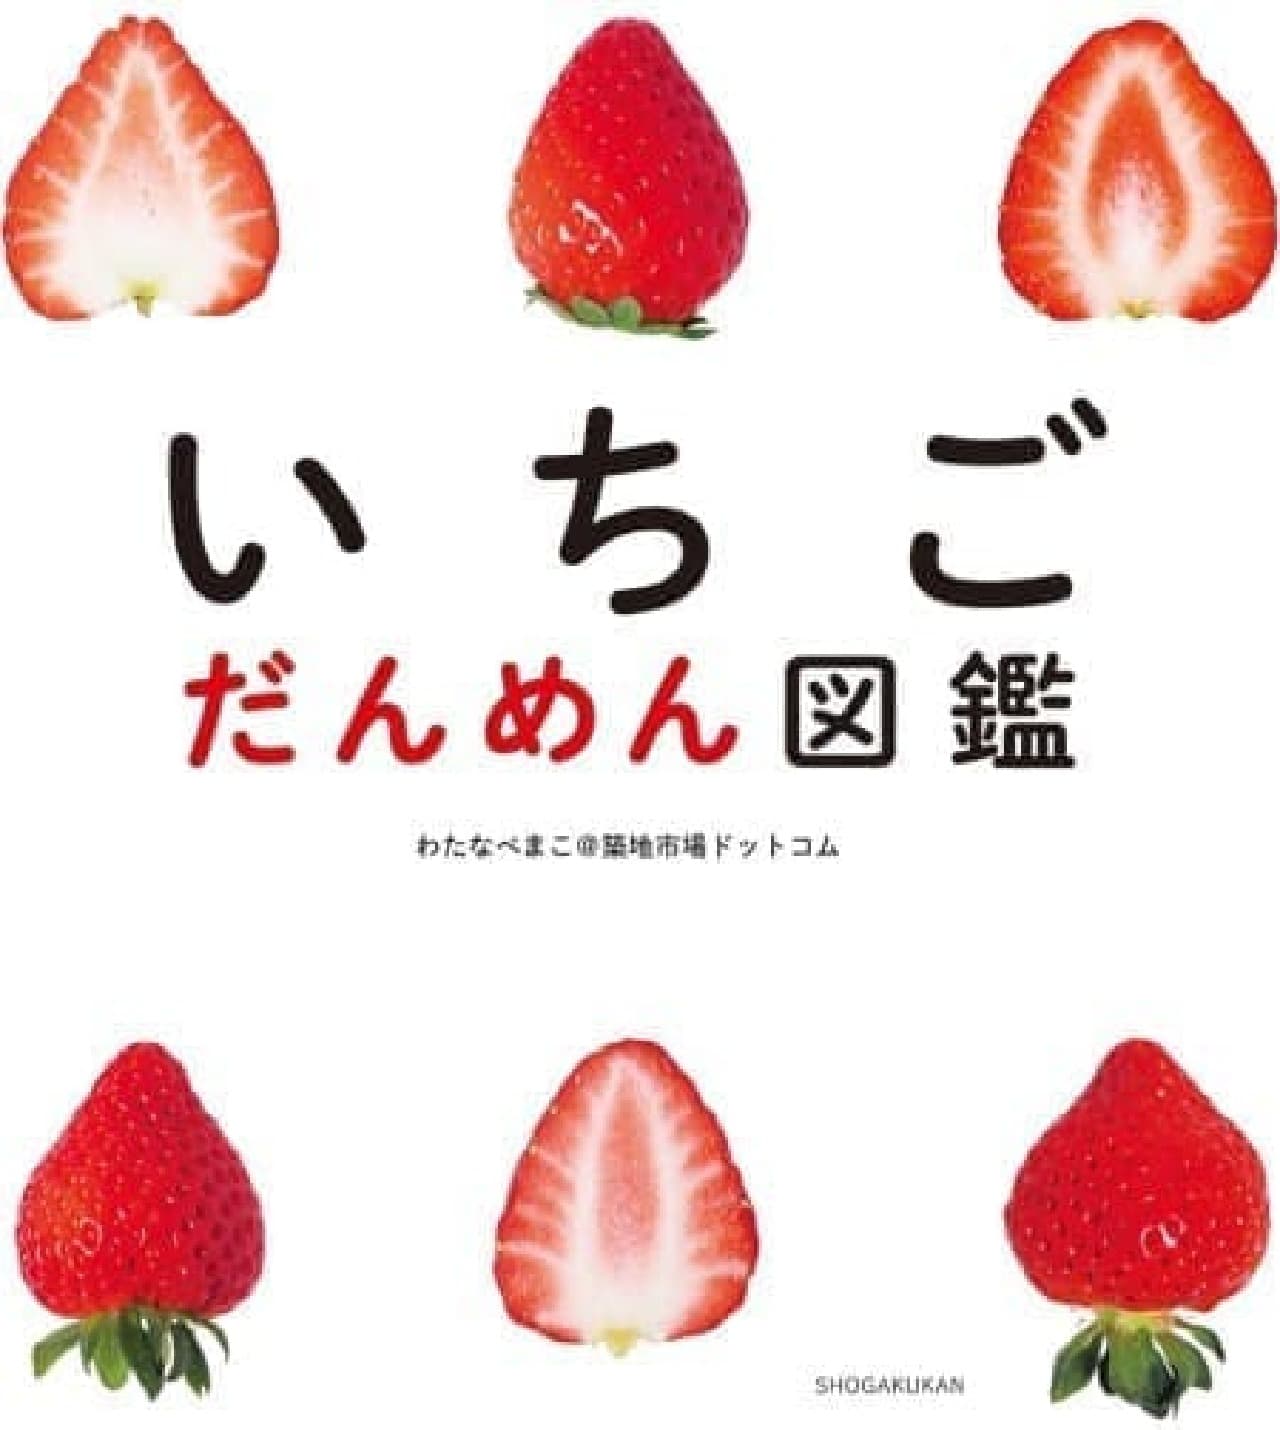 "Danmen Encyclopedia", a collection of photographs of strawberry cross sections